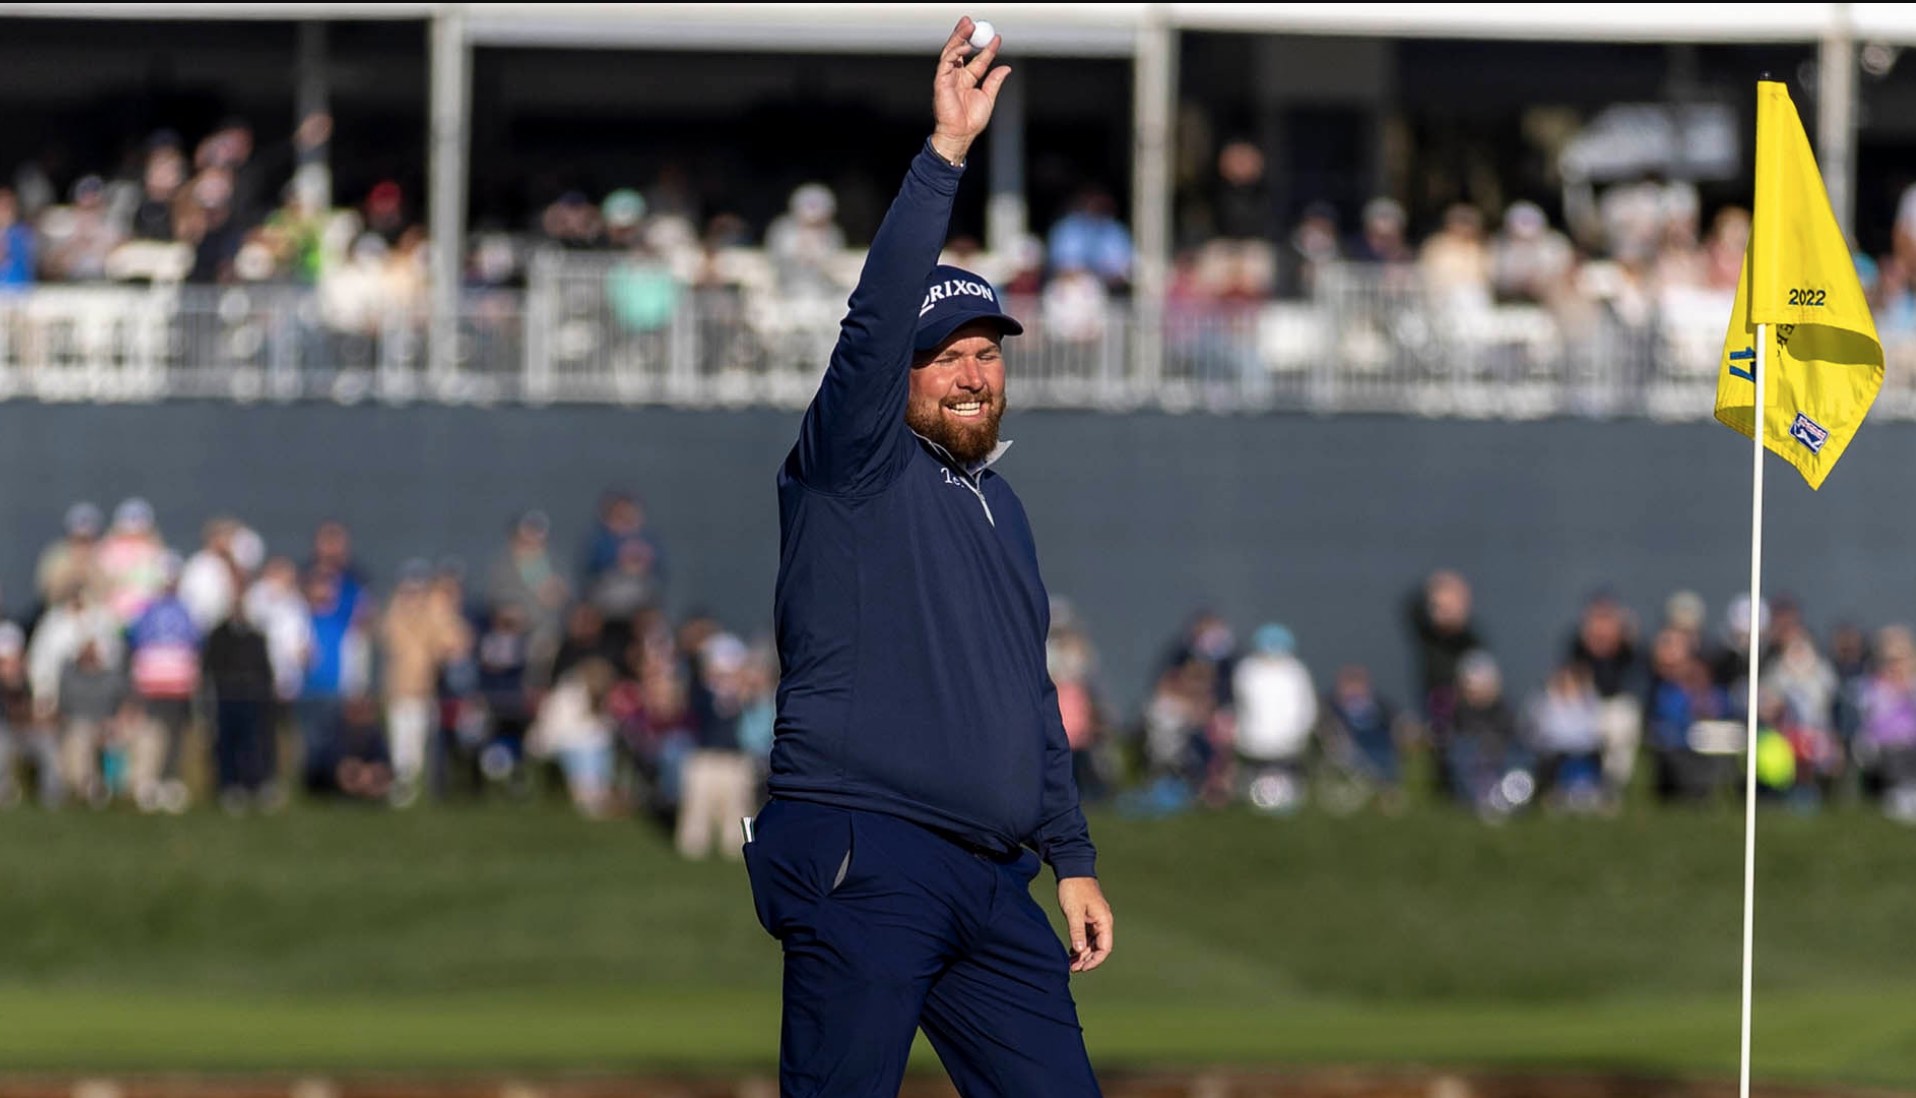 Watch Shane Lowry aces iconic 17th hole at The Players